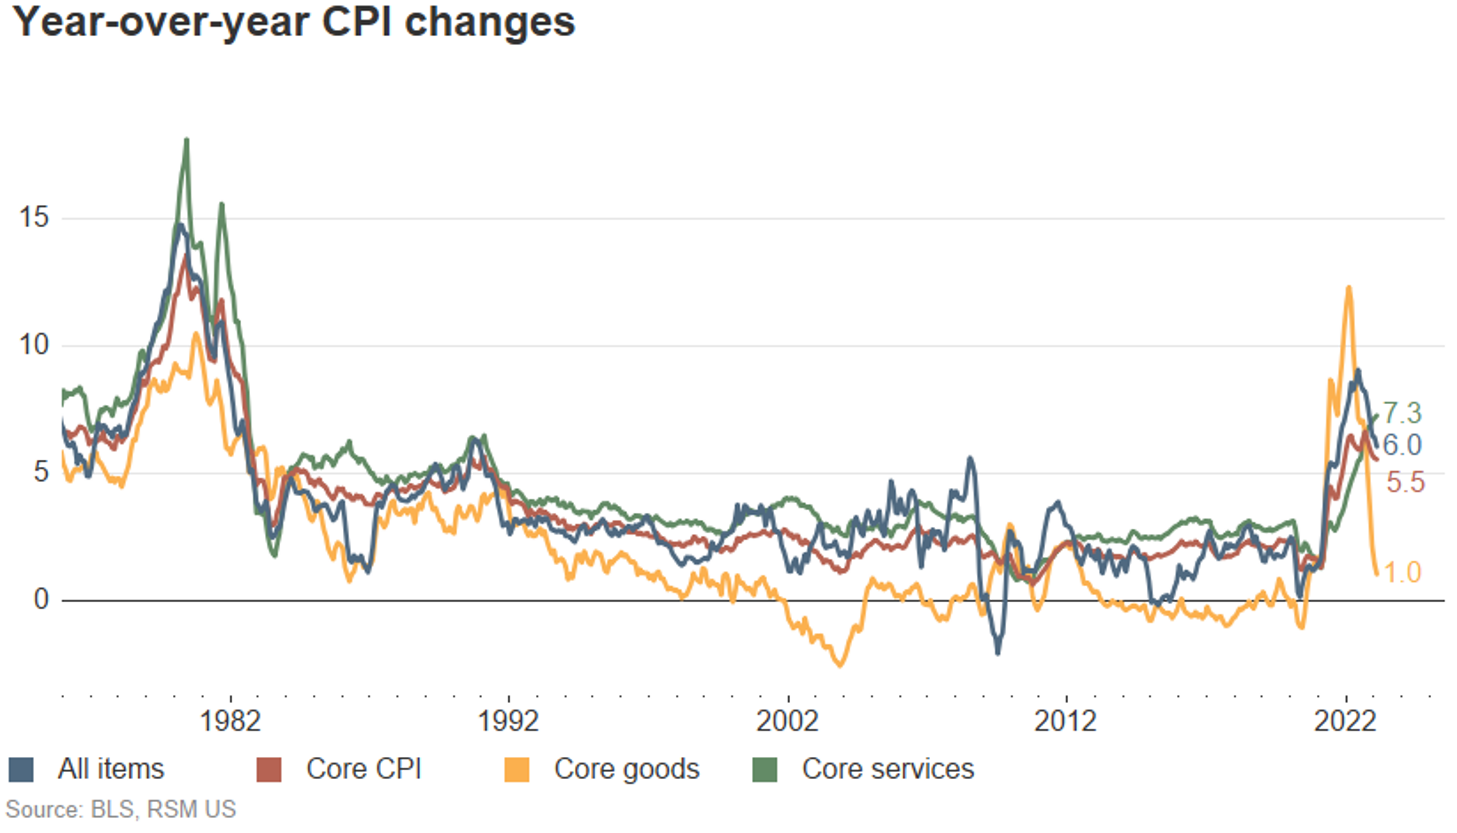 February CPI Balancing price stability vs. financial stability as